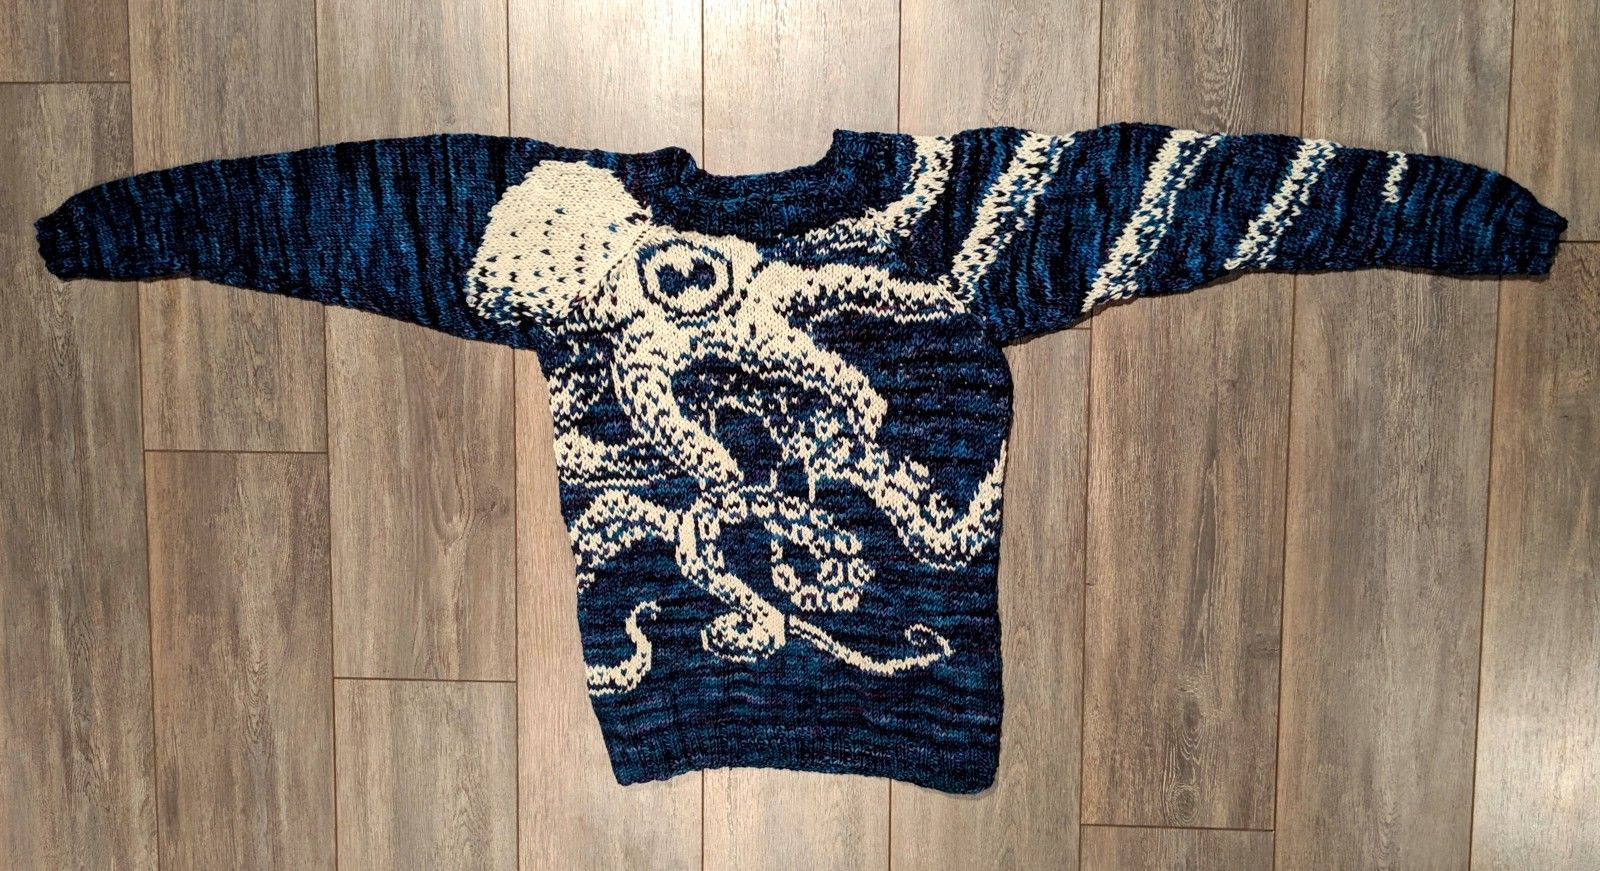 Knit by Abbey Perini, pattern is Embrace Octopus Sweater by Maia E. Sirnes